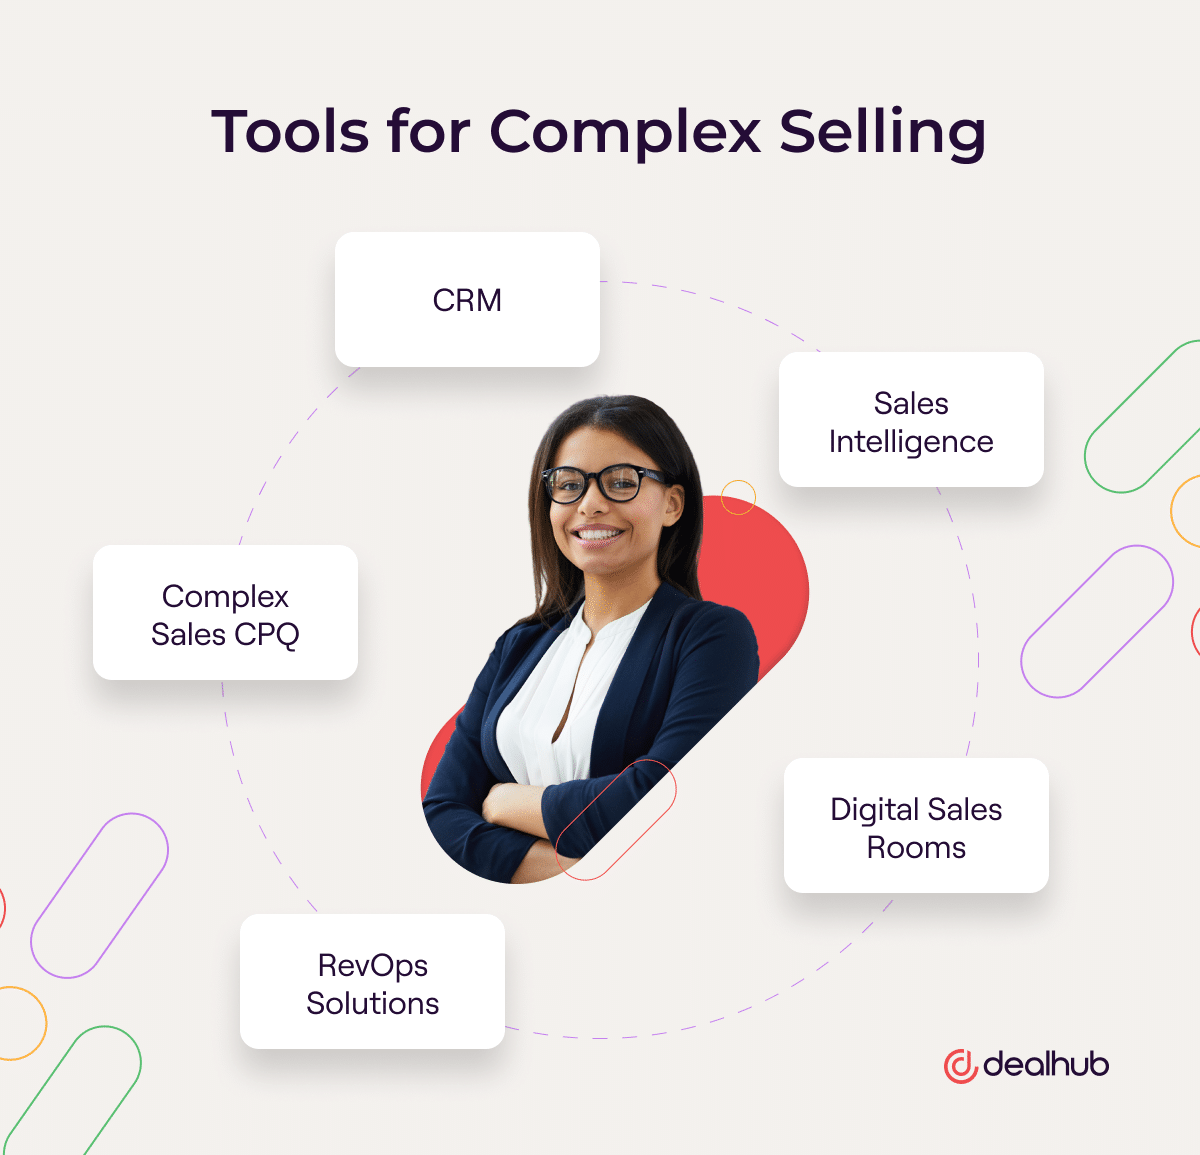 Tools for Complex Selling